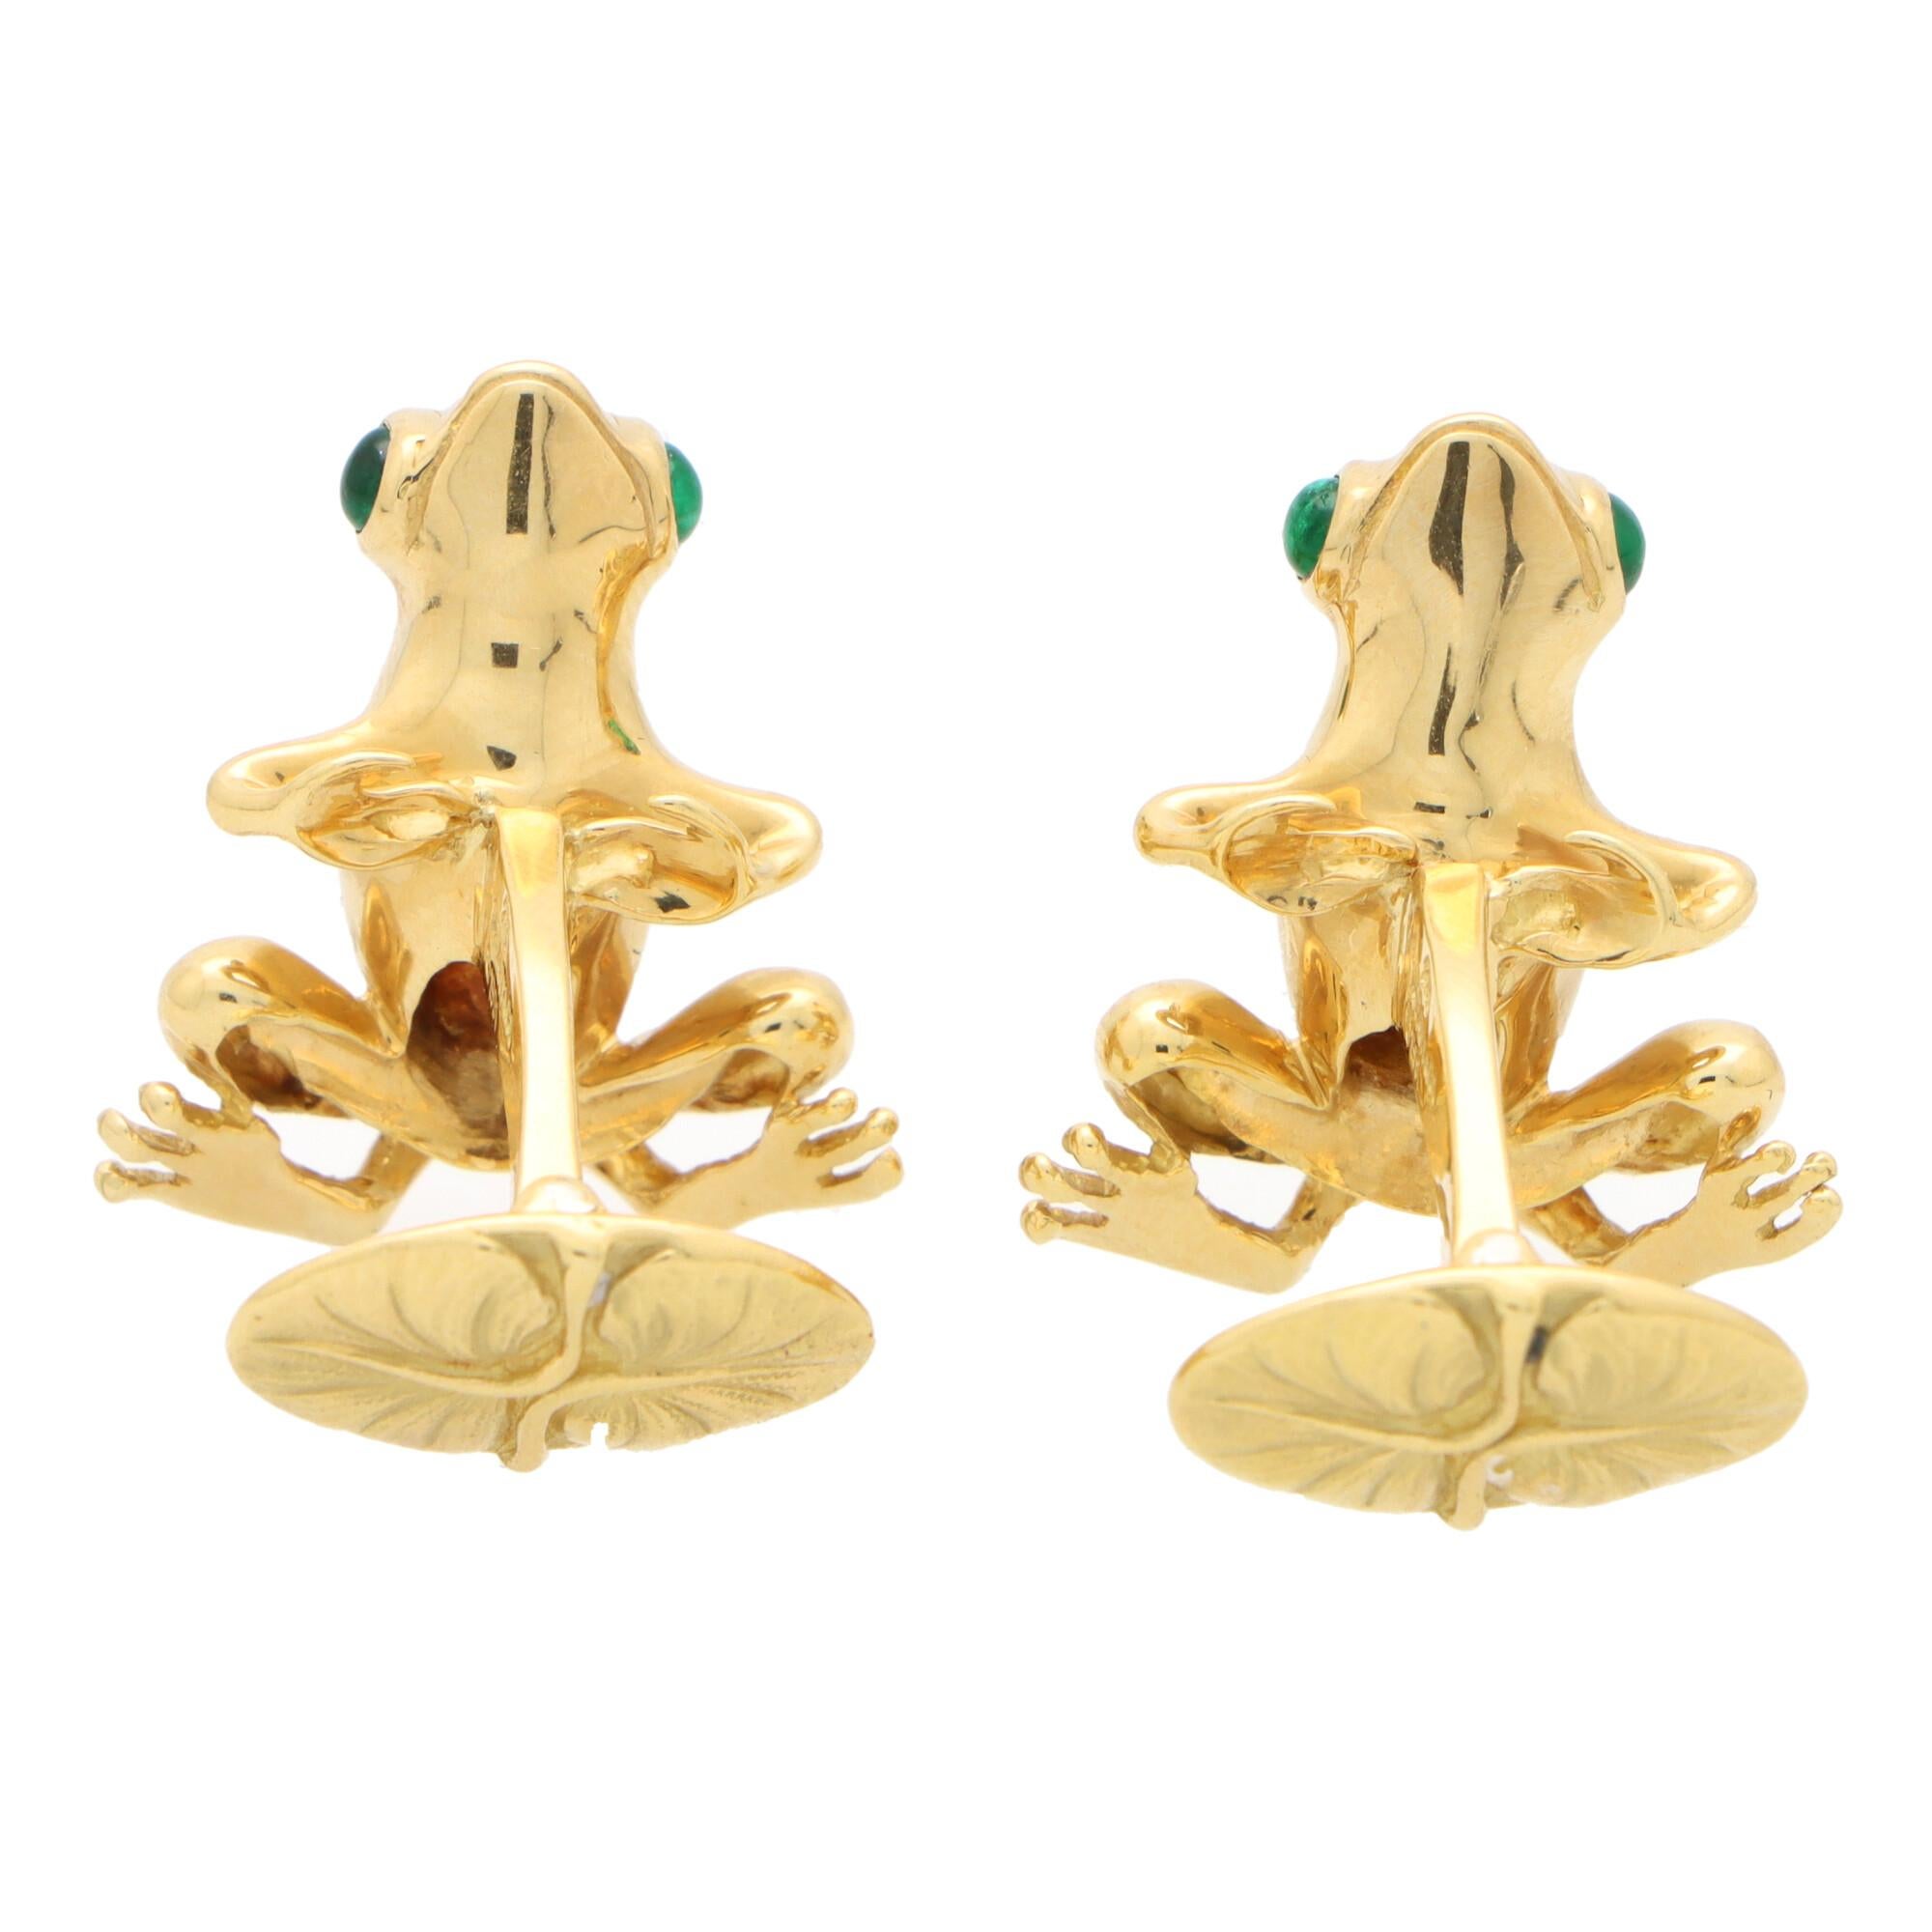 A rather beautiful pair of vintage Tiffany & Co. emerald frog cufflinks set in 18k yellow gold.

Each cufflink depicts a sitting frog, expertly crafted and detailed in solid yellow gold. The frog backs have been detailed with a textured effect and